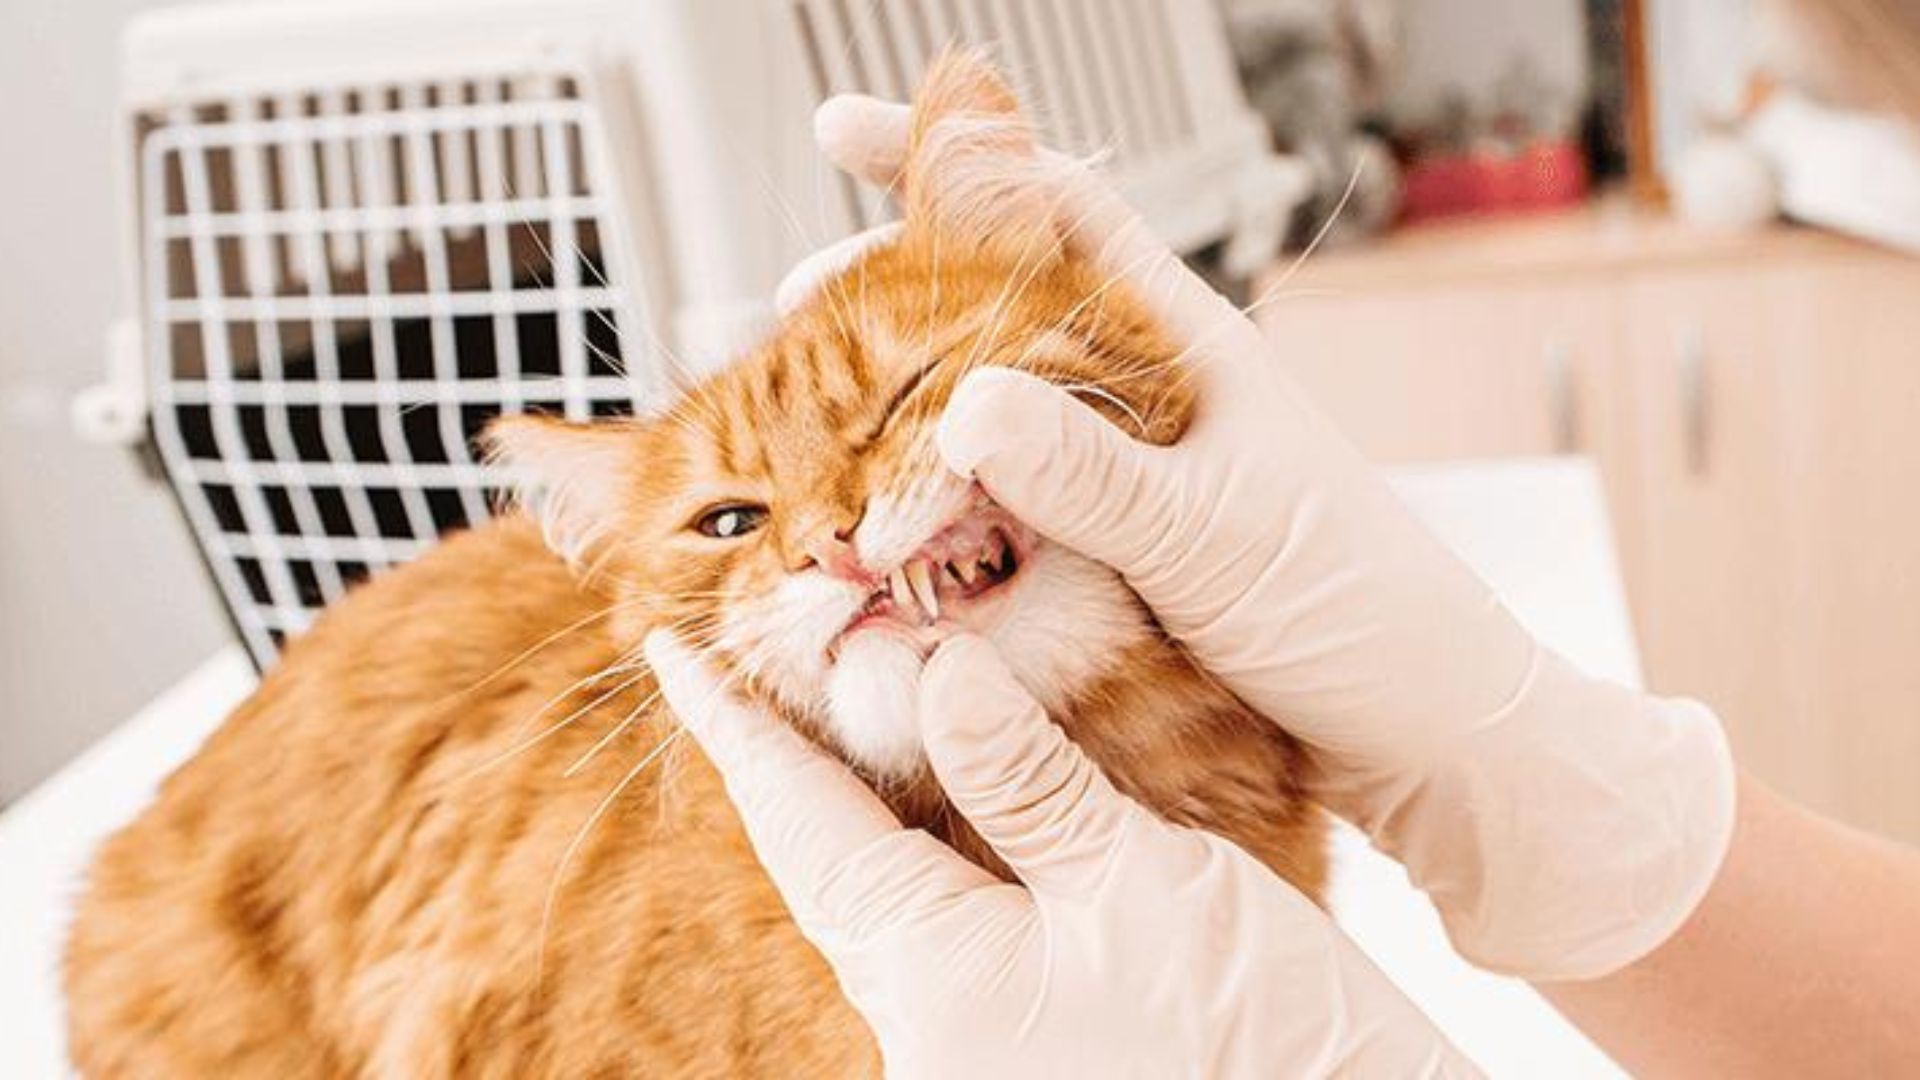 doctor doing dental examination of the cat